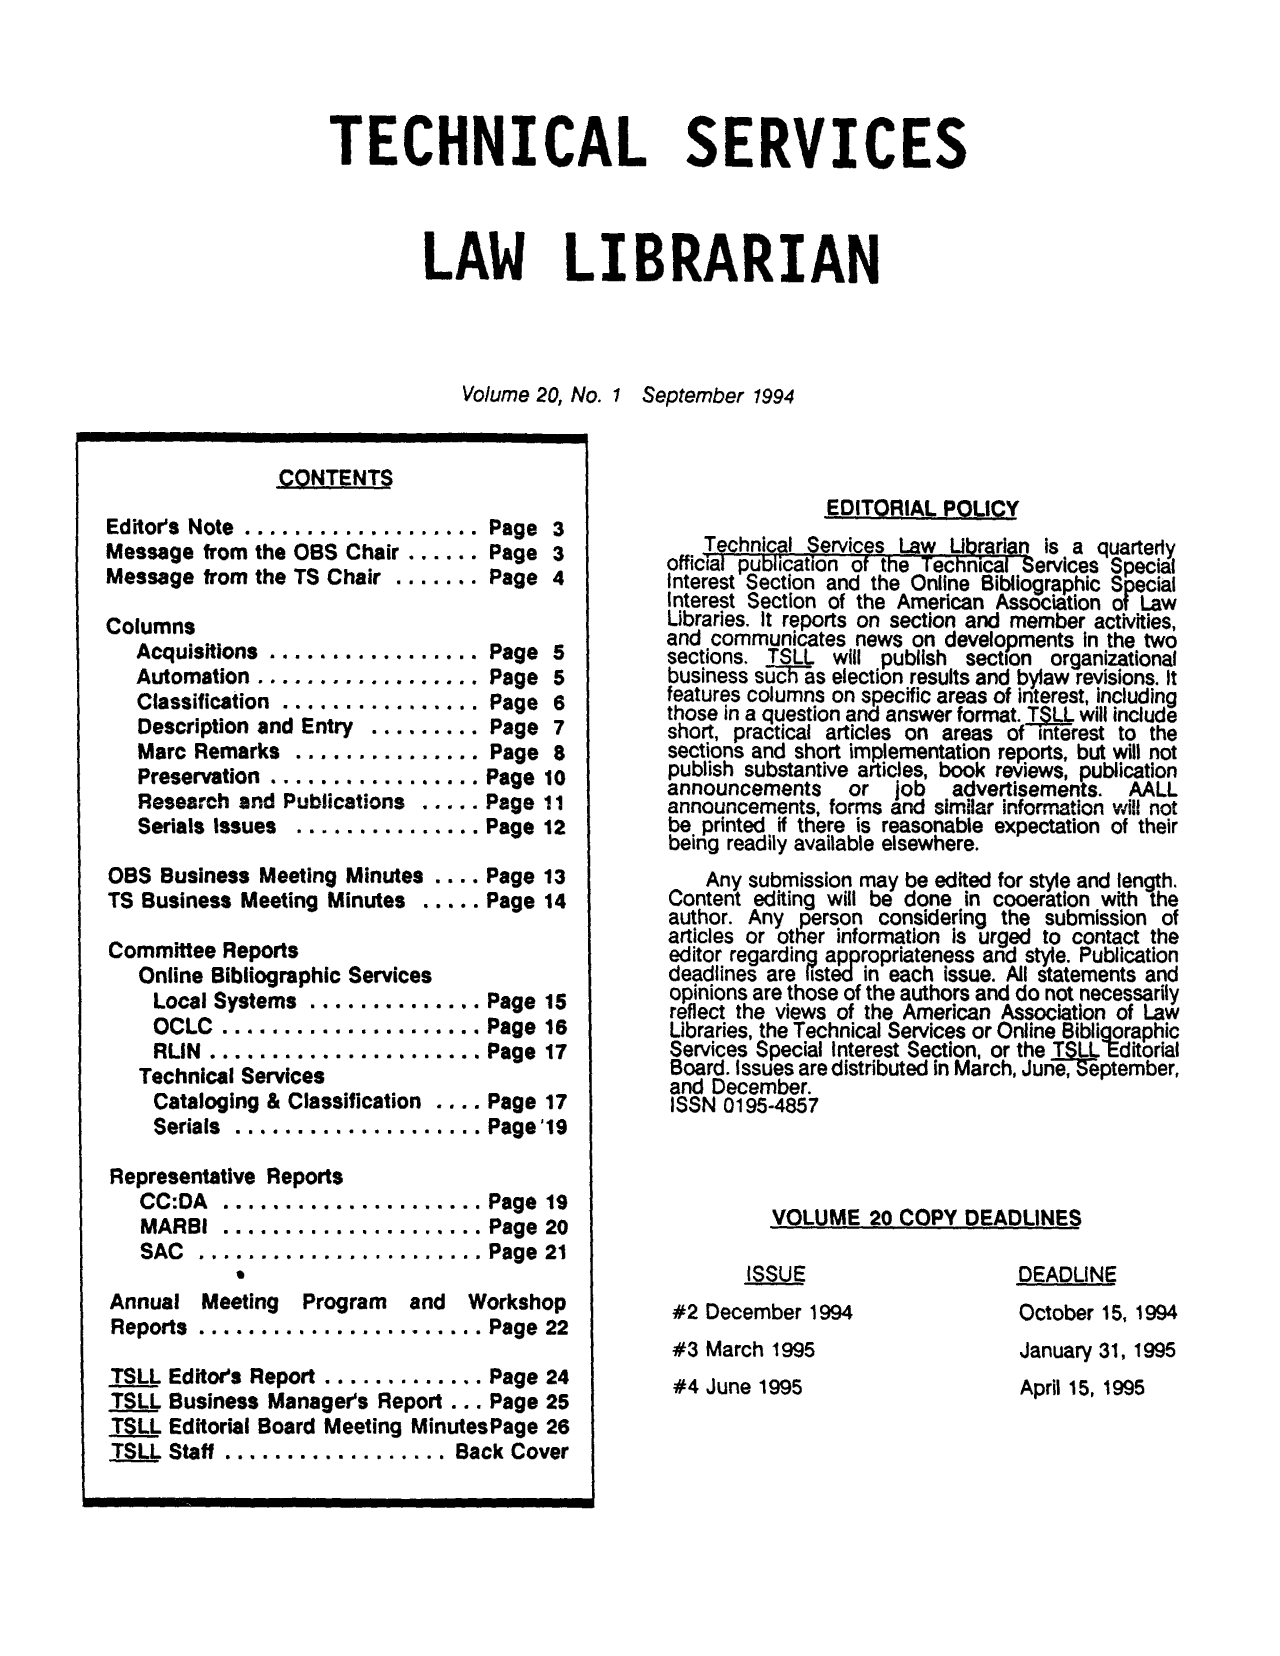 handle is hein.lcc/tsll0020 and id is 1 raw text is: TECHNICAL SERVICES
LAW   LIBRARIAN
Volume 20, No. 1 September 1994

CONTENTS

Editor's Note..................Page
Message from the OBS Chair......Page
Message from the TS Chair....... Page
Columns
Acquisitions................Page
Automation.................Page
Classification...............Page
Description and Entry.........Page
Marc Remarks..............Page
Preservation................Page
Research and Publications..... Page
Serials Issues..............Page
OBS Business Meeting Minutes .... Page
TS Business Meeting Minutes.....Page

3
3
4
5
5
6
7
8
10
i1
12
13
14

Committee Reports
Online Bibliographic Services
Local Systems.............Page 15
OCLC...................Page 16
RLIN....................Page 17
Technical Services
Cataloging & Classification .... Page 17
Serials ...................Page I9

Representative Reports
CC:DA...................
MARBI...................
SAC....................
S

Page 19
Page 20
Page 21

Annual Meeting Program and Workshop
Reports .......................Page 22
TSLL Editor's Report ............. Page 24
TSLL Business Manager's Report ... Page 25
TSLL Editorial Board Meeting MinutesPage 26
TSLL Staff.................Back Cover

EDITORIAL POLICY
Technical Services Law Librarian is a quarterly
official publication of the Technical-Services Special
Interest Section and the Online Bibliographic Special
Interest Section of the American Association of Law
Libraries. It reports on section and member activities,
and communicates news on developments in the two
sections. TSLL will publish section organizational
business sOuchas election results and bylaw revisions. It
features columns on specific areas of interest, including
those in a question and answer format. T   will include
short, practical articles on areas of interest to the
sections and short implementation reports, but will not
publish substantive articles, book reviews, publication
announcements   or   job  advertisements. AALL
announcements, forms and similar information will not
beprintedRifthere is reasonable expectation of their
being readily available elsewhere.
Any submission may be edited for style and length.
Content editing will be done in cooeration with the
author. Any person considering the submission of
articles or other information is urged to contact the
editor regarding appropriateness and style. Publication
deadlines are listed in each issue. All statements and
opinions are those of the authors and do not necessarily
reflect the views of the American Association of Law
Libraries, the Technical Services or Online Bibligoraphic
Services Special Interest Section, or the TiL4.Editorial
Board. Issues are distributed in March, June,September,
and December.
ISSN 0195-4857

VOLUME 20 COPY DEADLINES

ISSUE
#2 December 1994
#3 March 1995
#4 June 1995

DEADLINE
October 15, 1994
January 31, 1995
April 15, 1995


